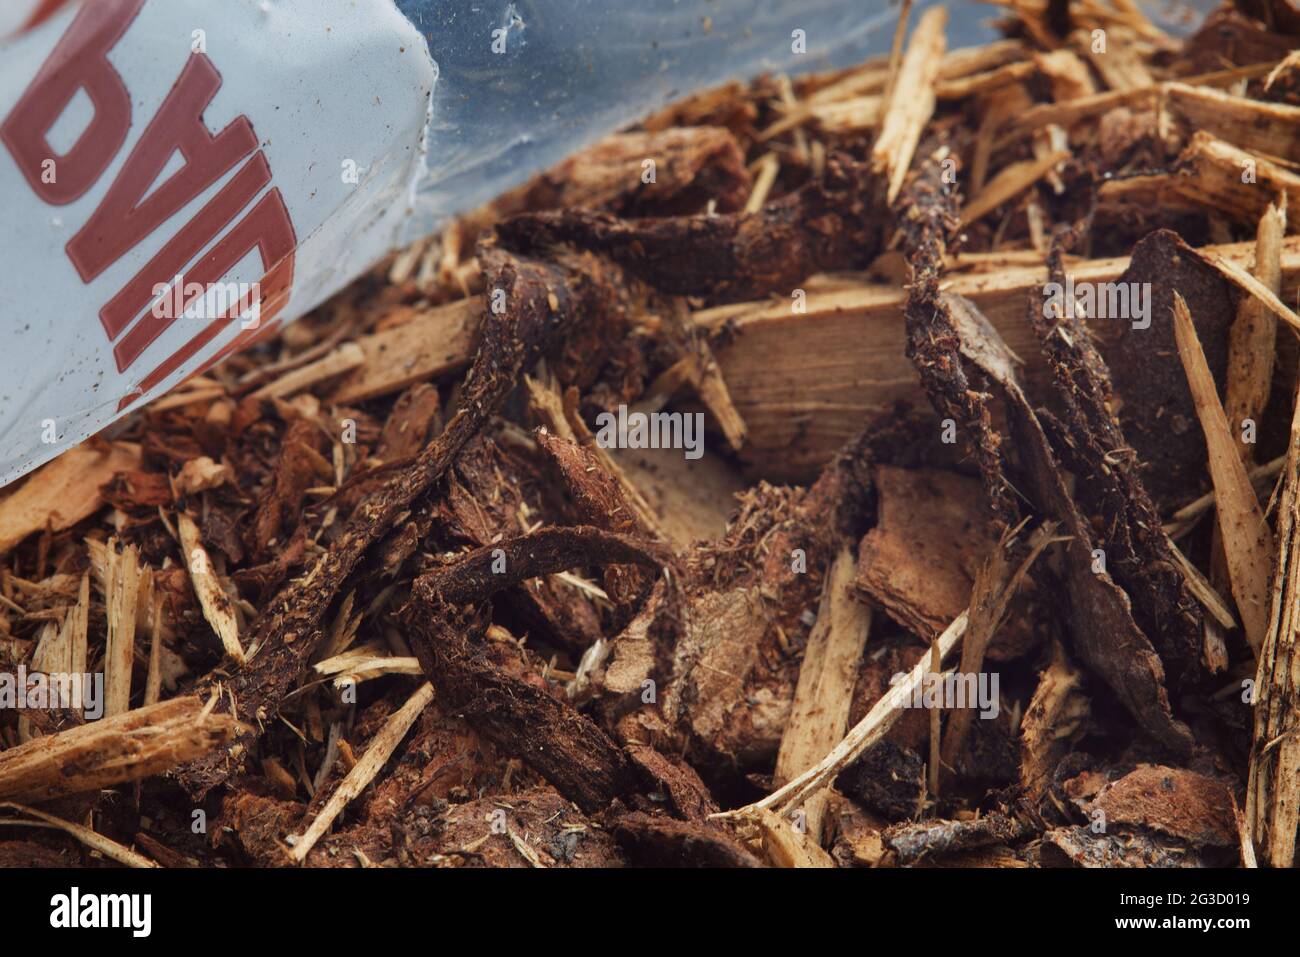 A photograph of the inside of a bag of natural garden mulch and natural bark nuggets for use around plants in a garden to help with weeds. Stock Photo